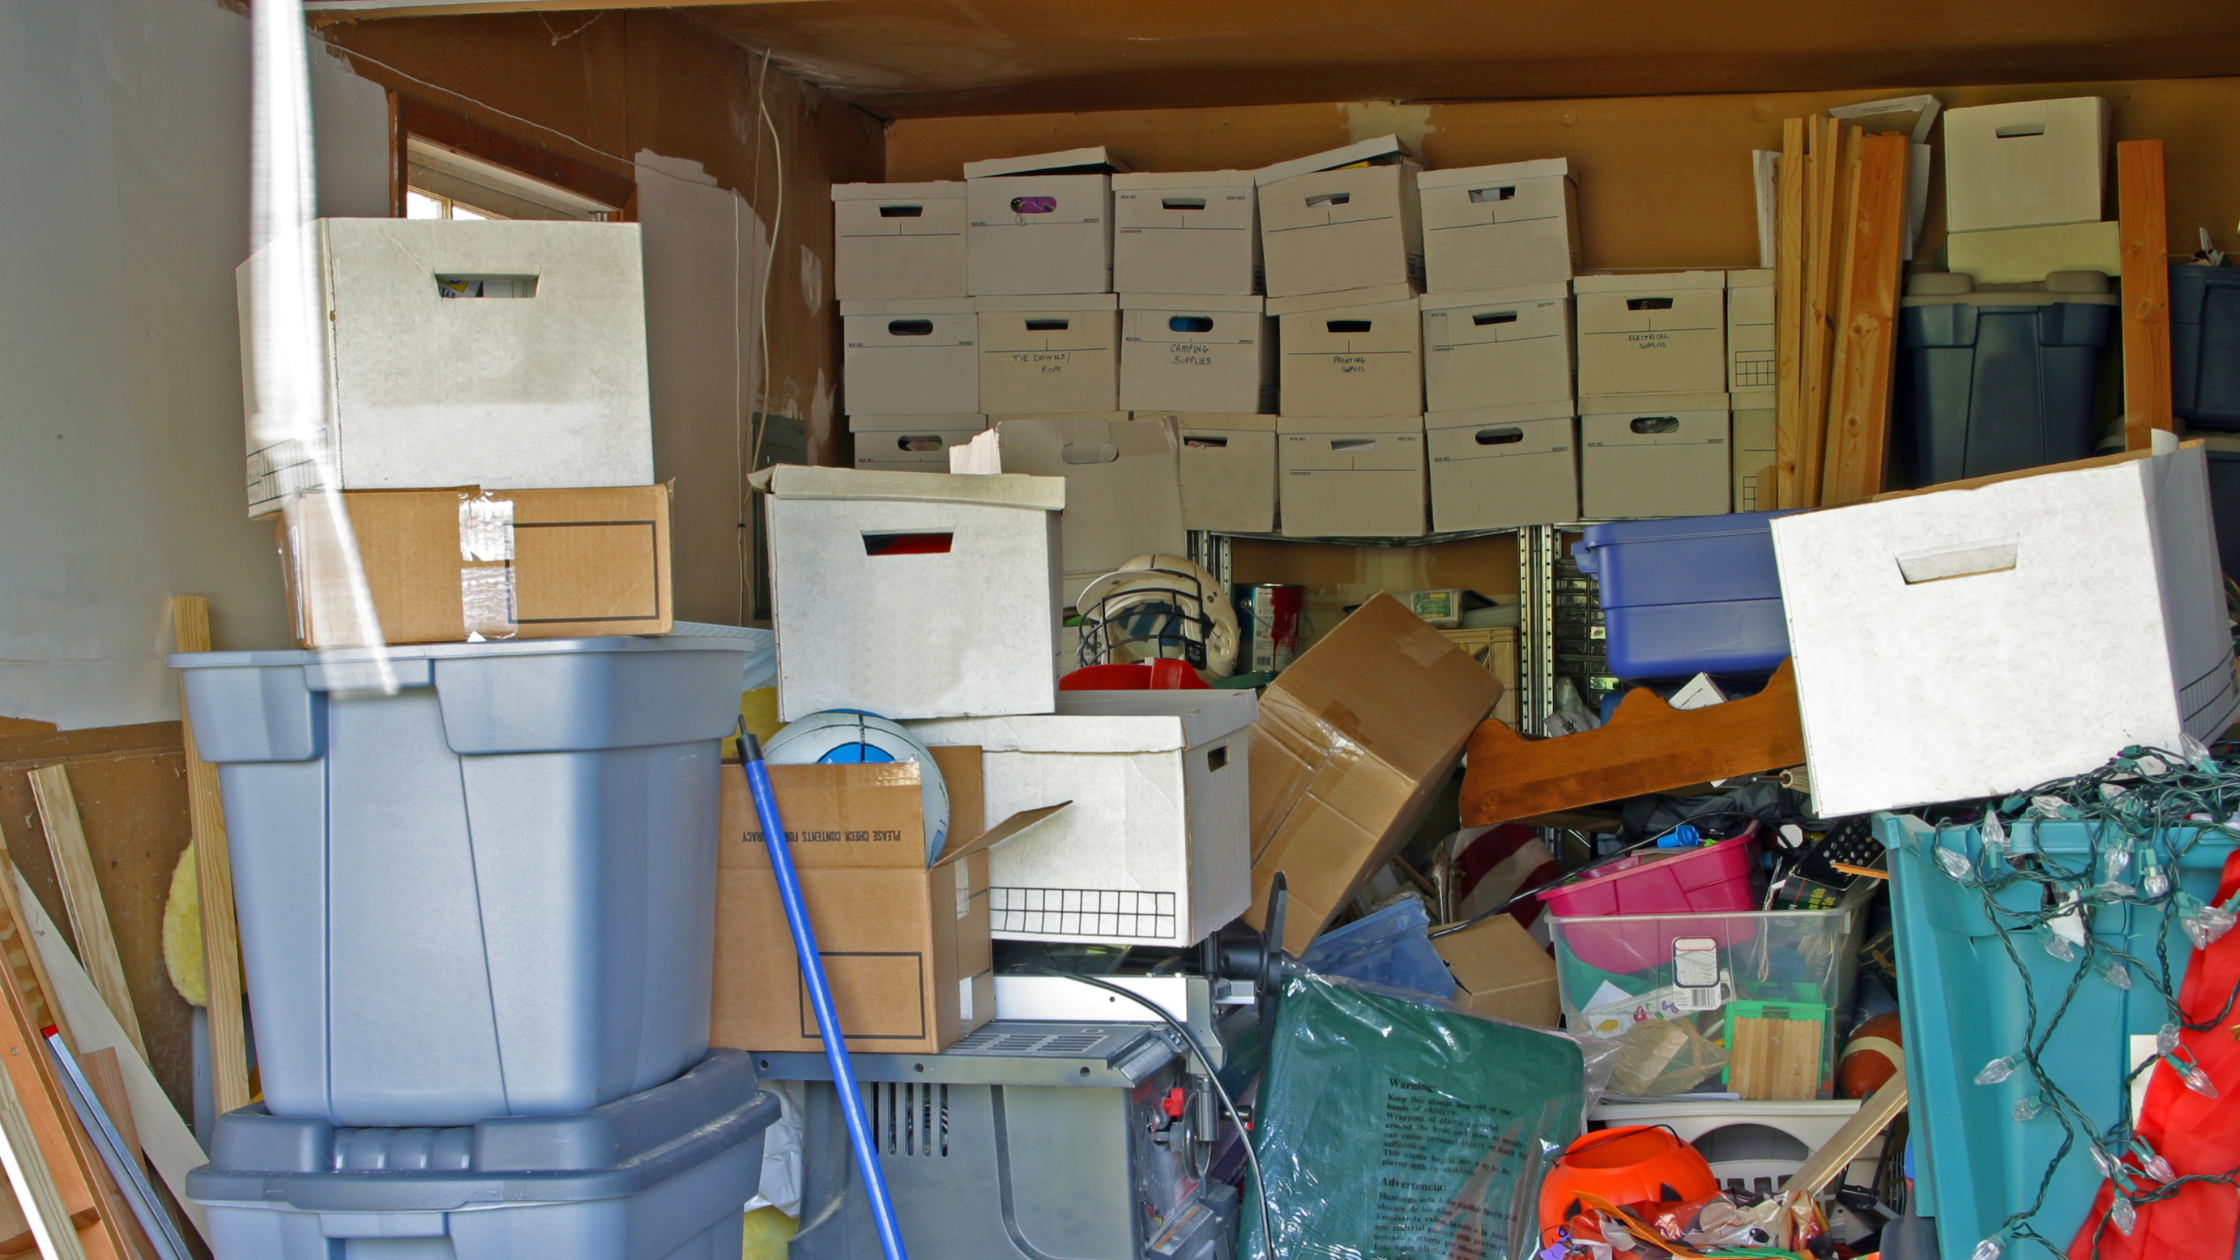 10 Secrets to Successfully Deal with Your Parents’ Clutter